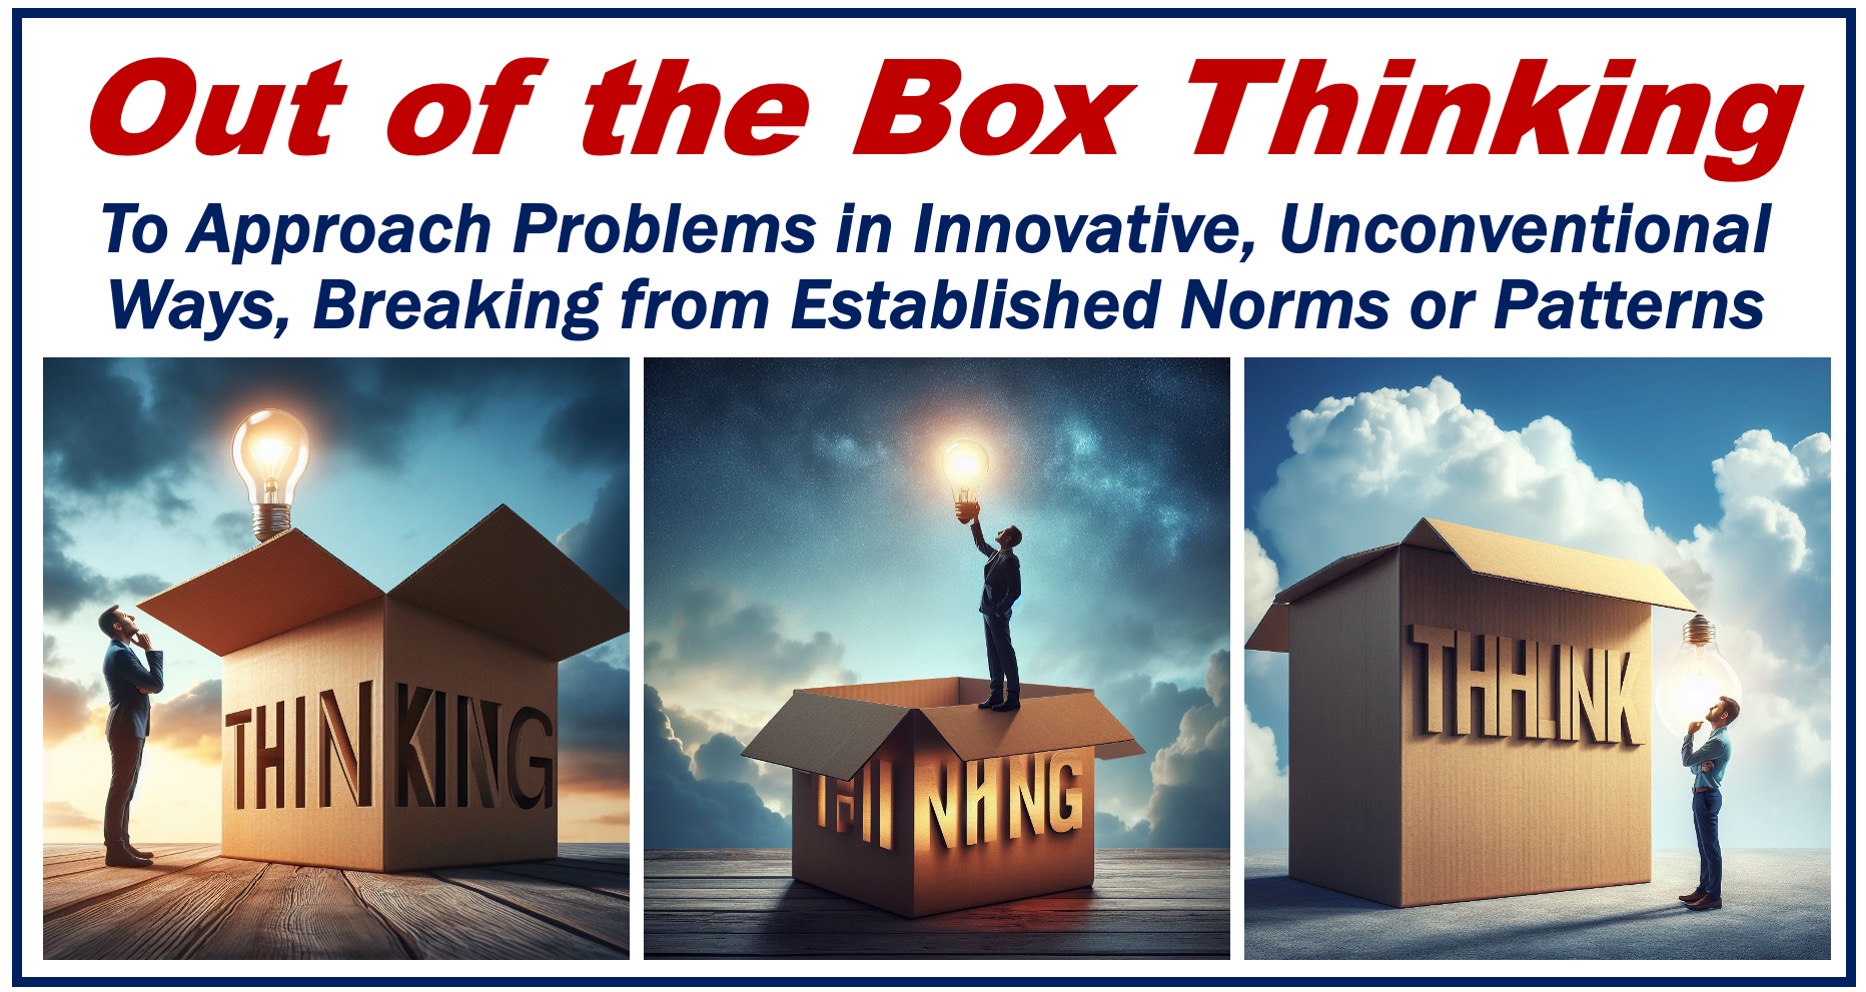 Three images depicting Out of the Box Thinking